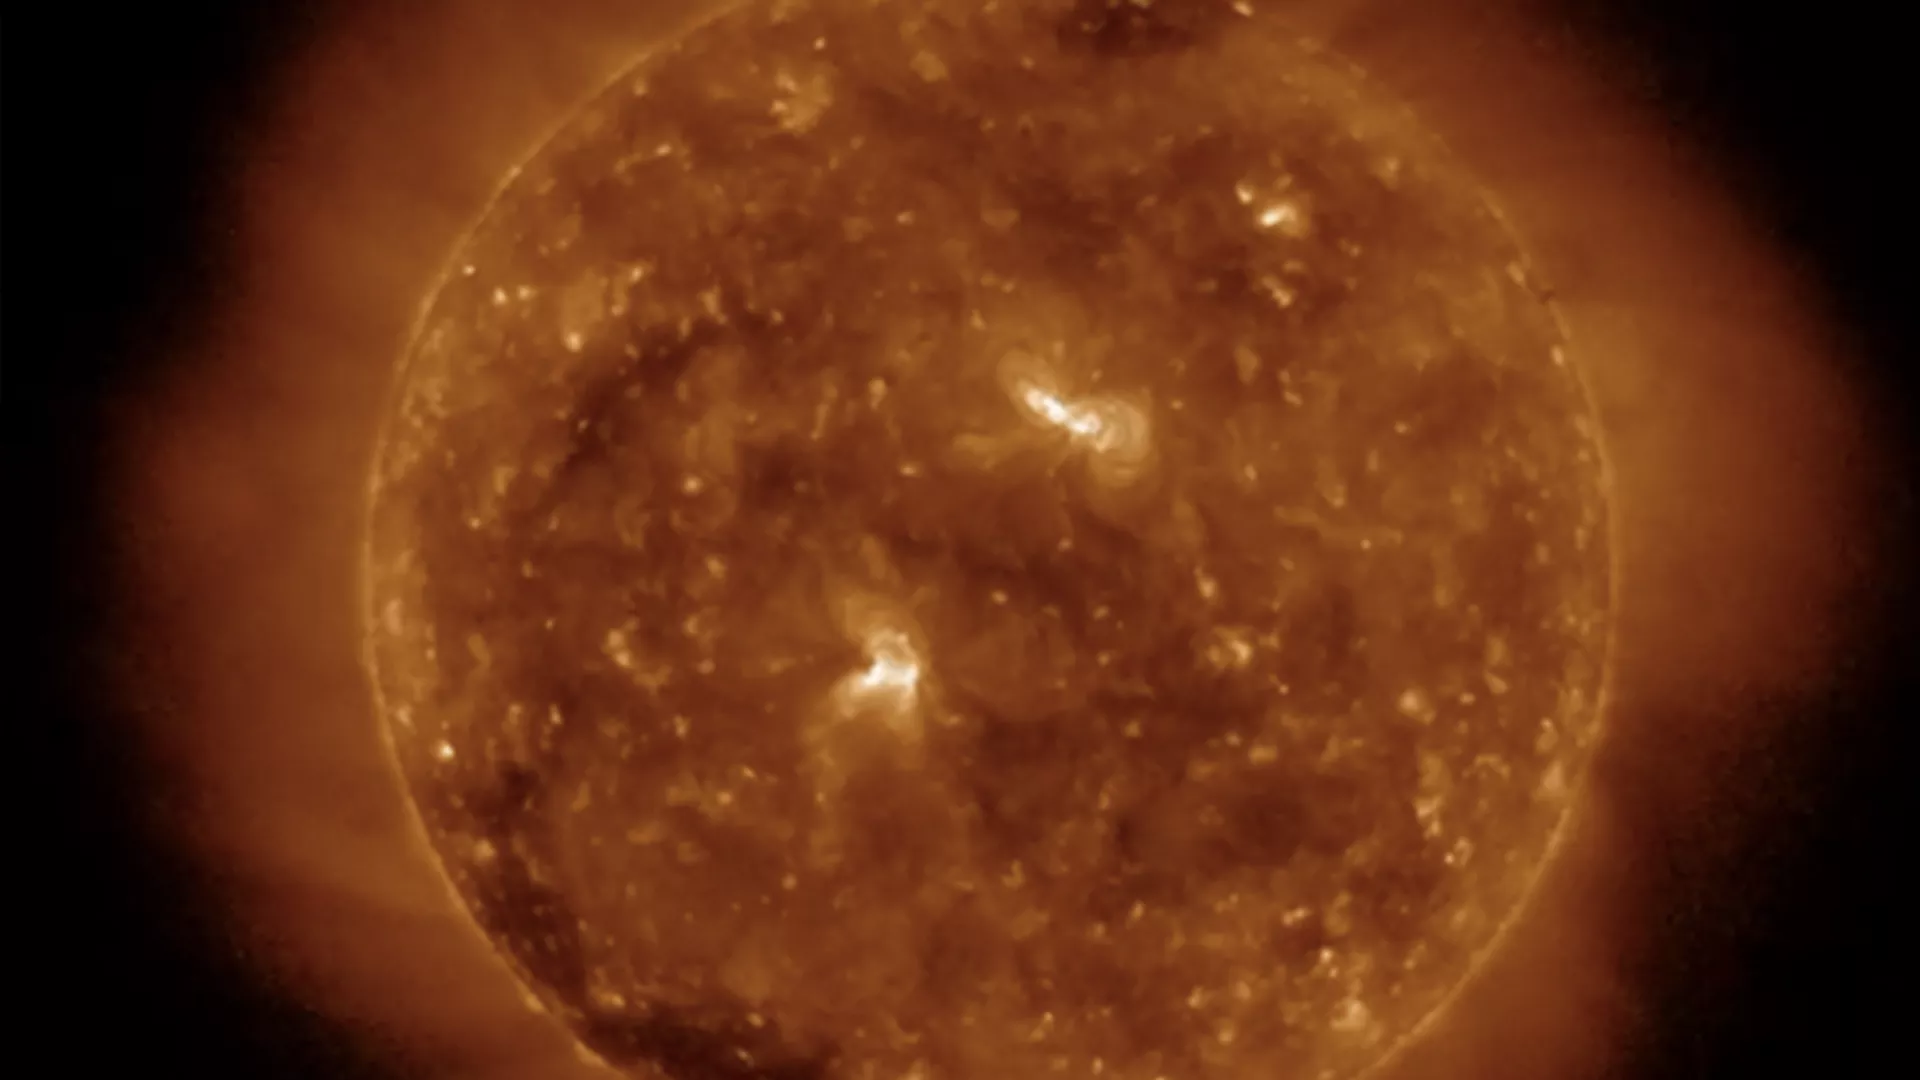 Image of a solar flare from the sun